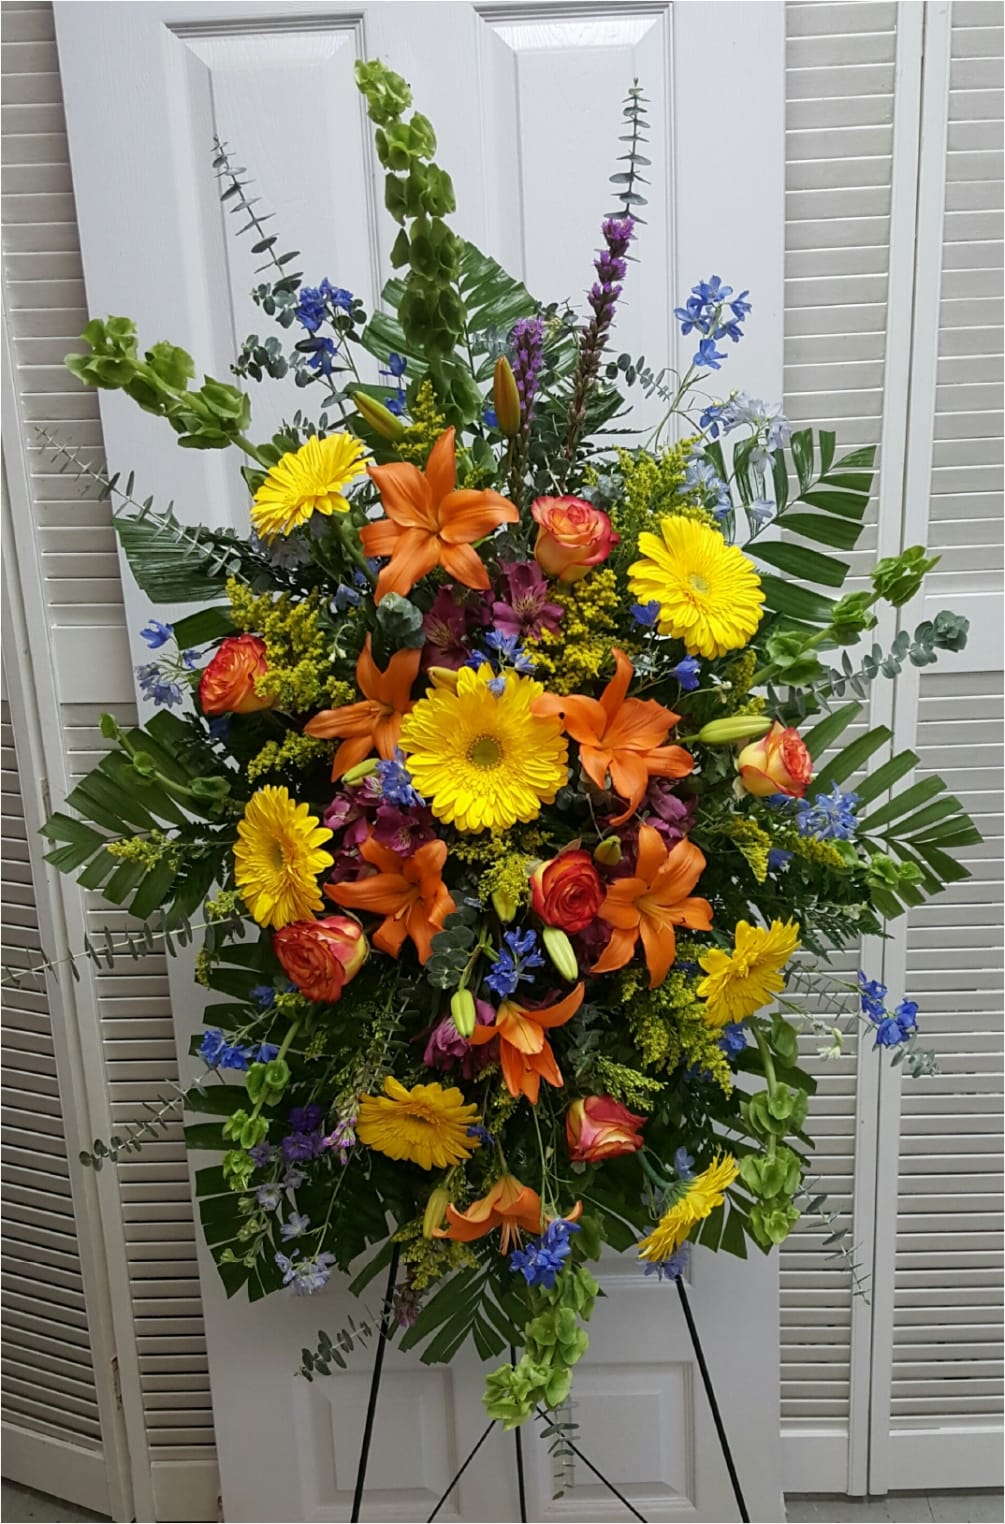 This Sympathy Easel consists of Green Bells of Ireland, Blue Delphinium, Yellow